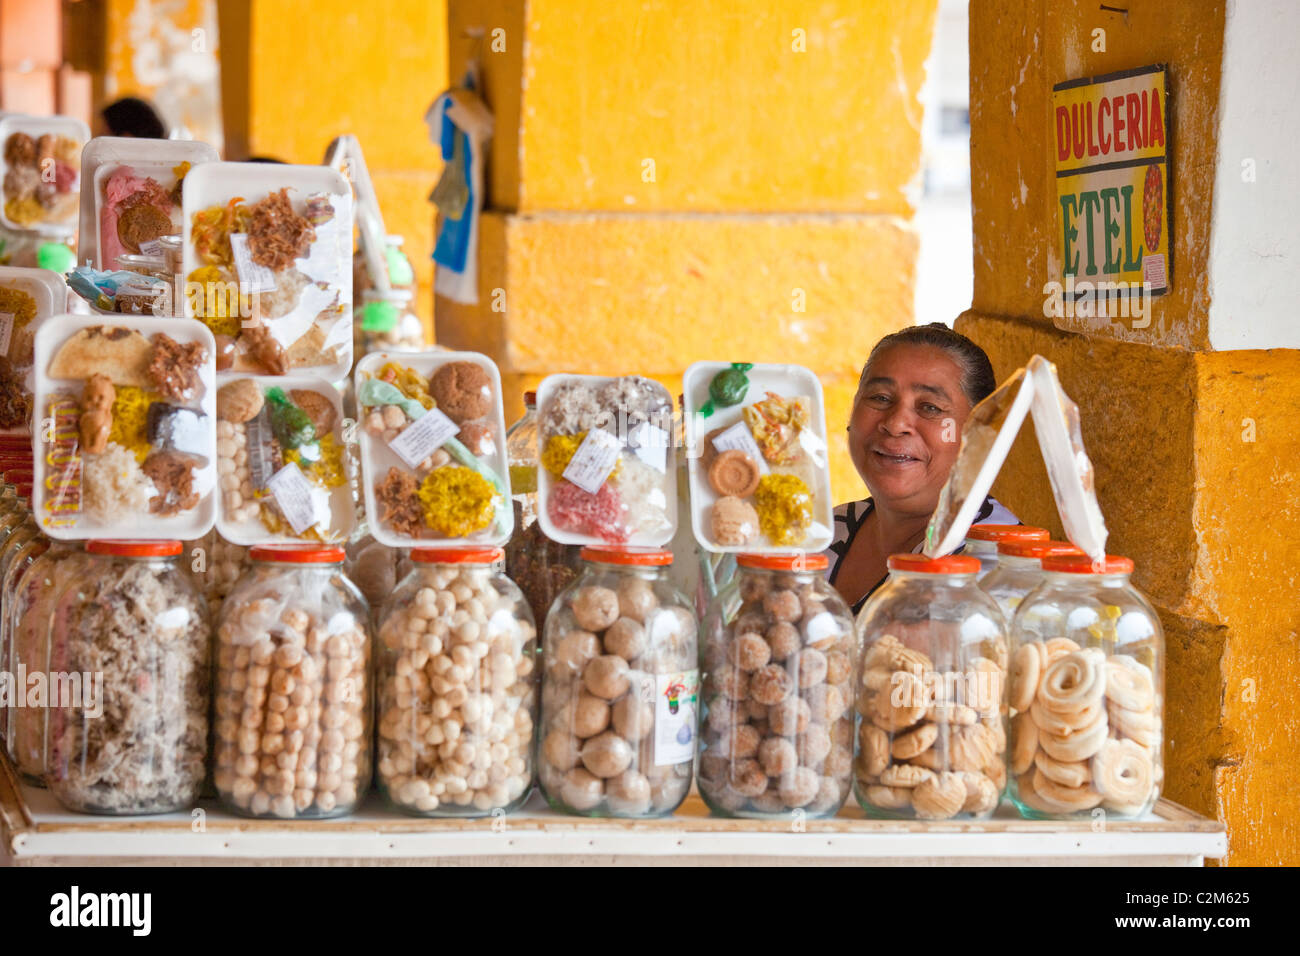 Portal de los Dulces, sweets shops in the old town, Cartagena, Colombia Stock Photo